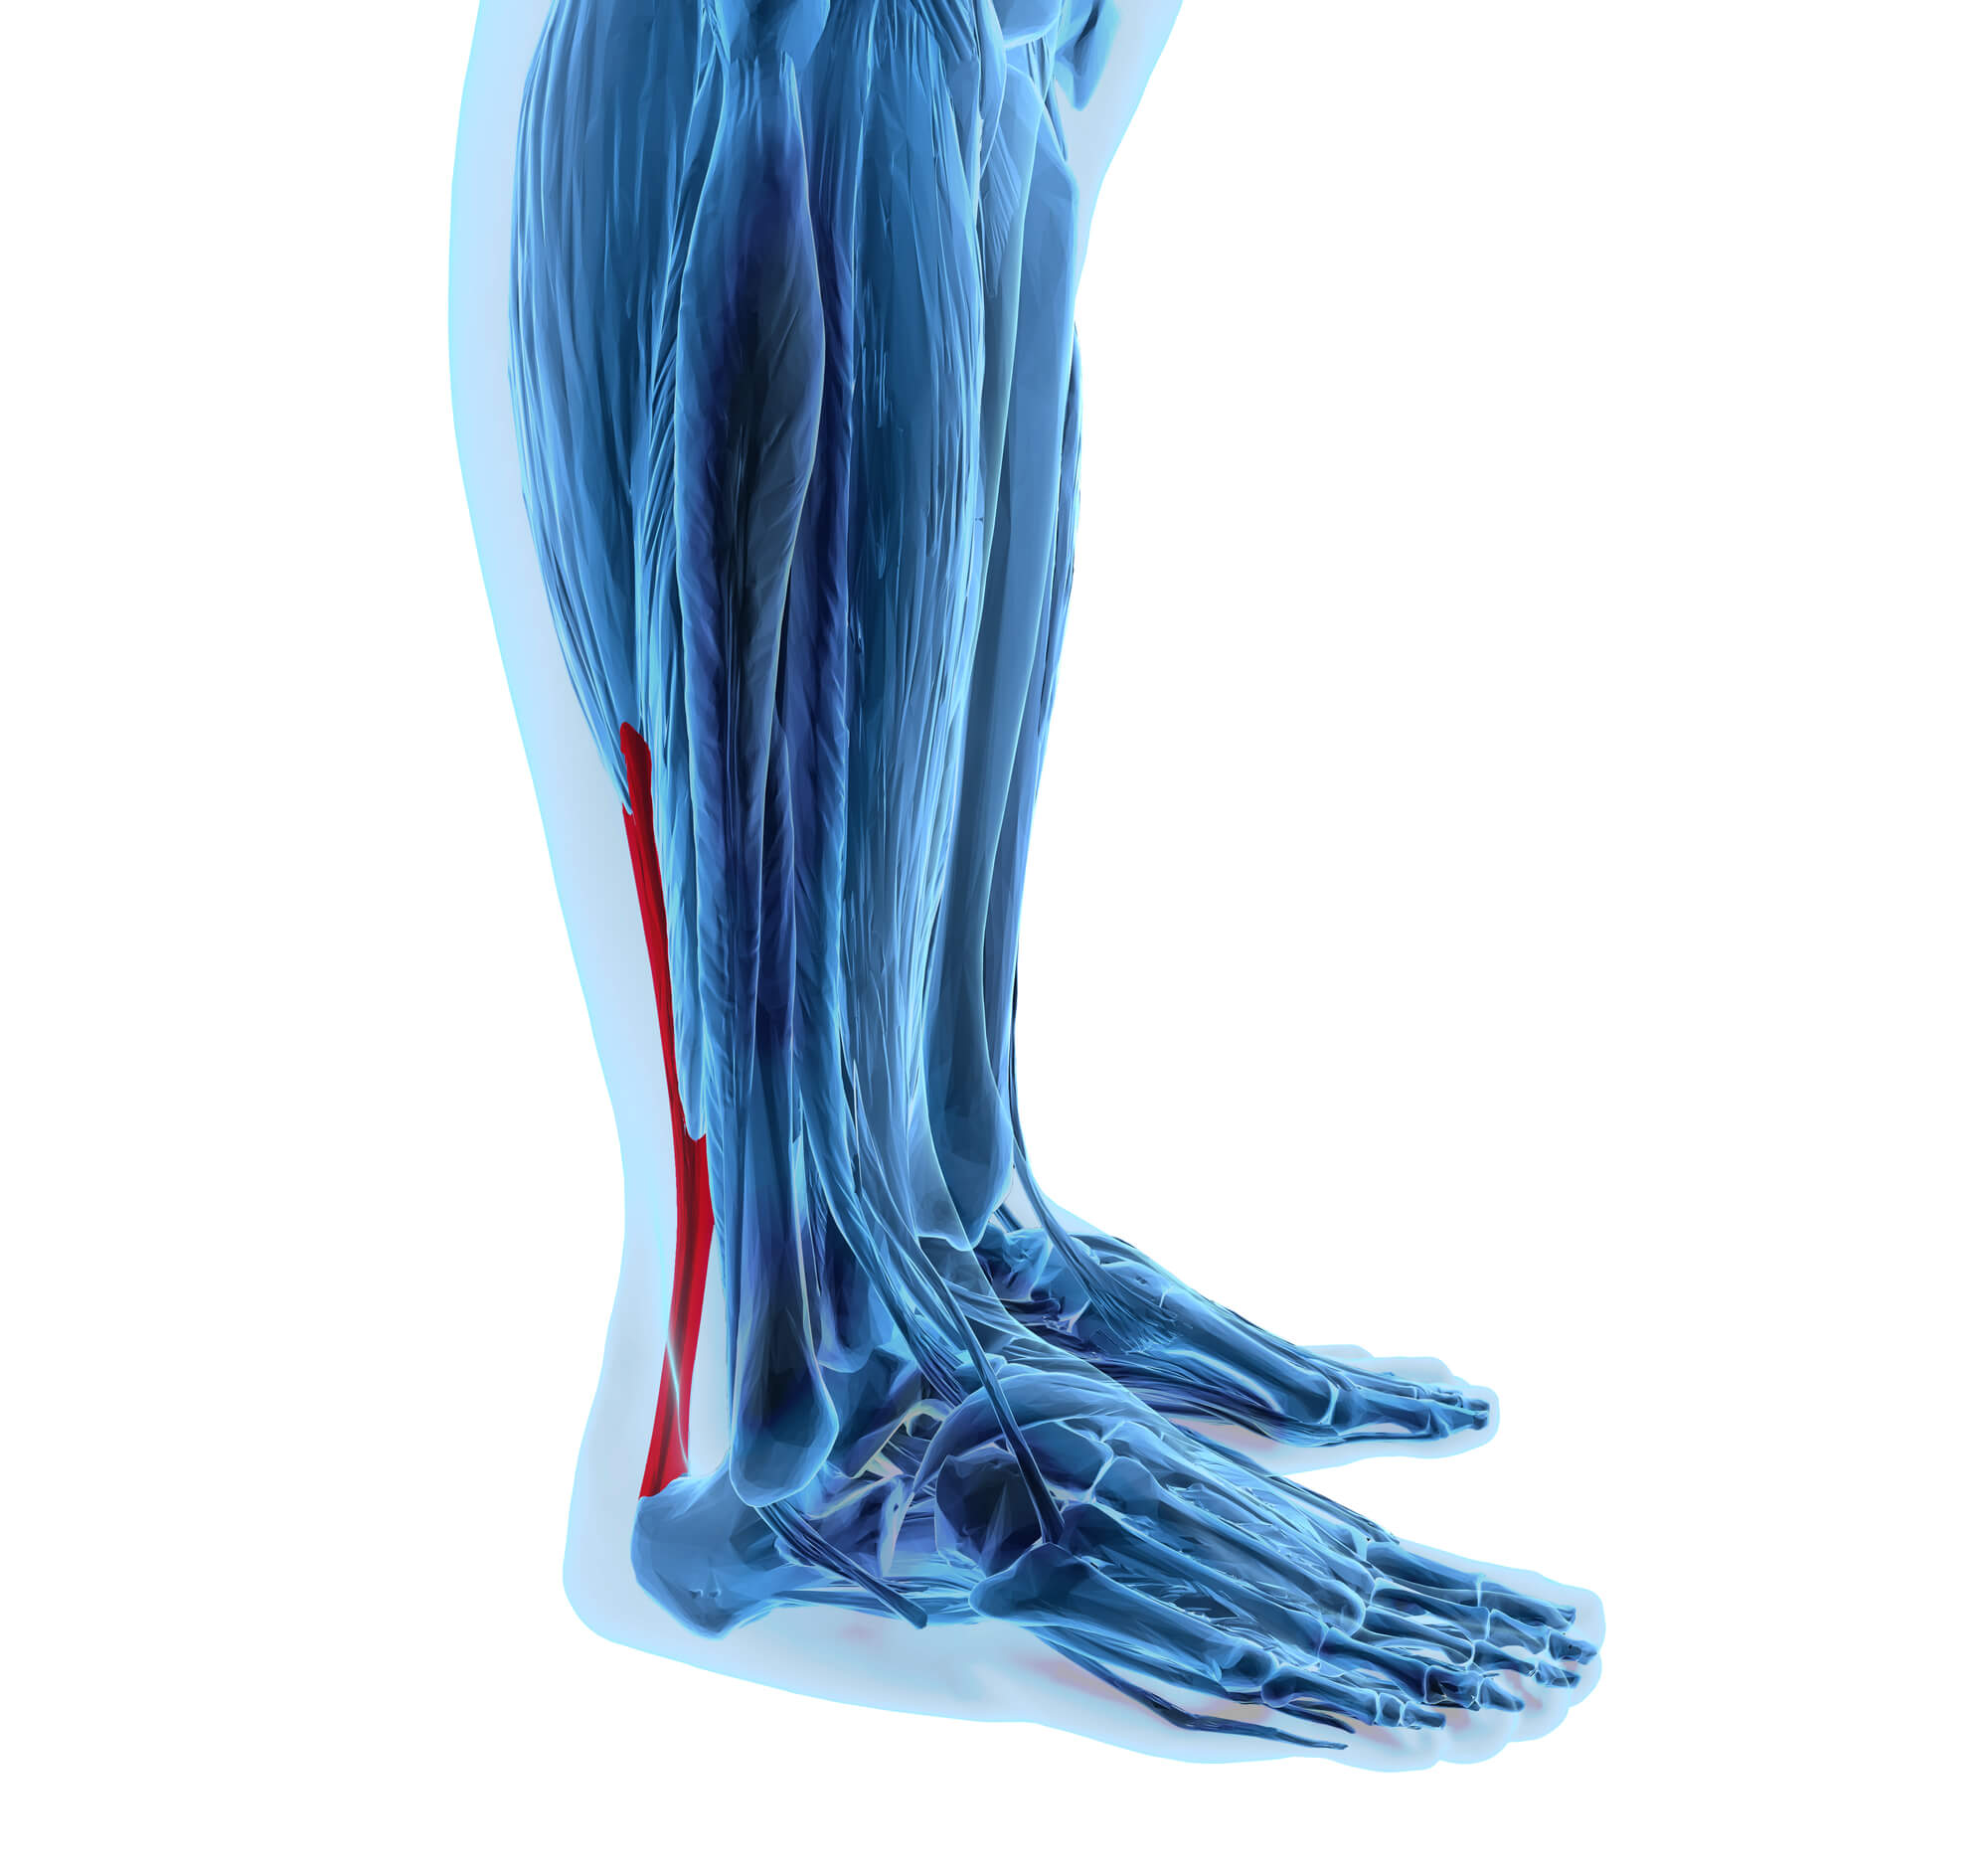 Achilles tendon with lower leg muscles